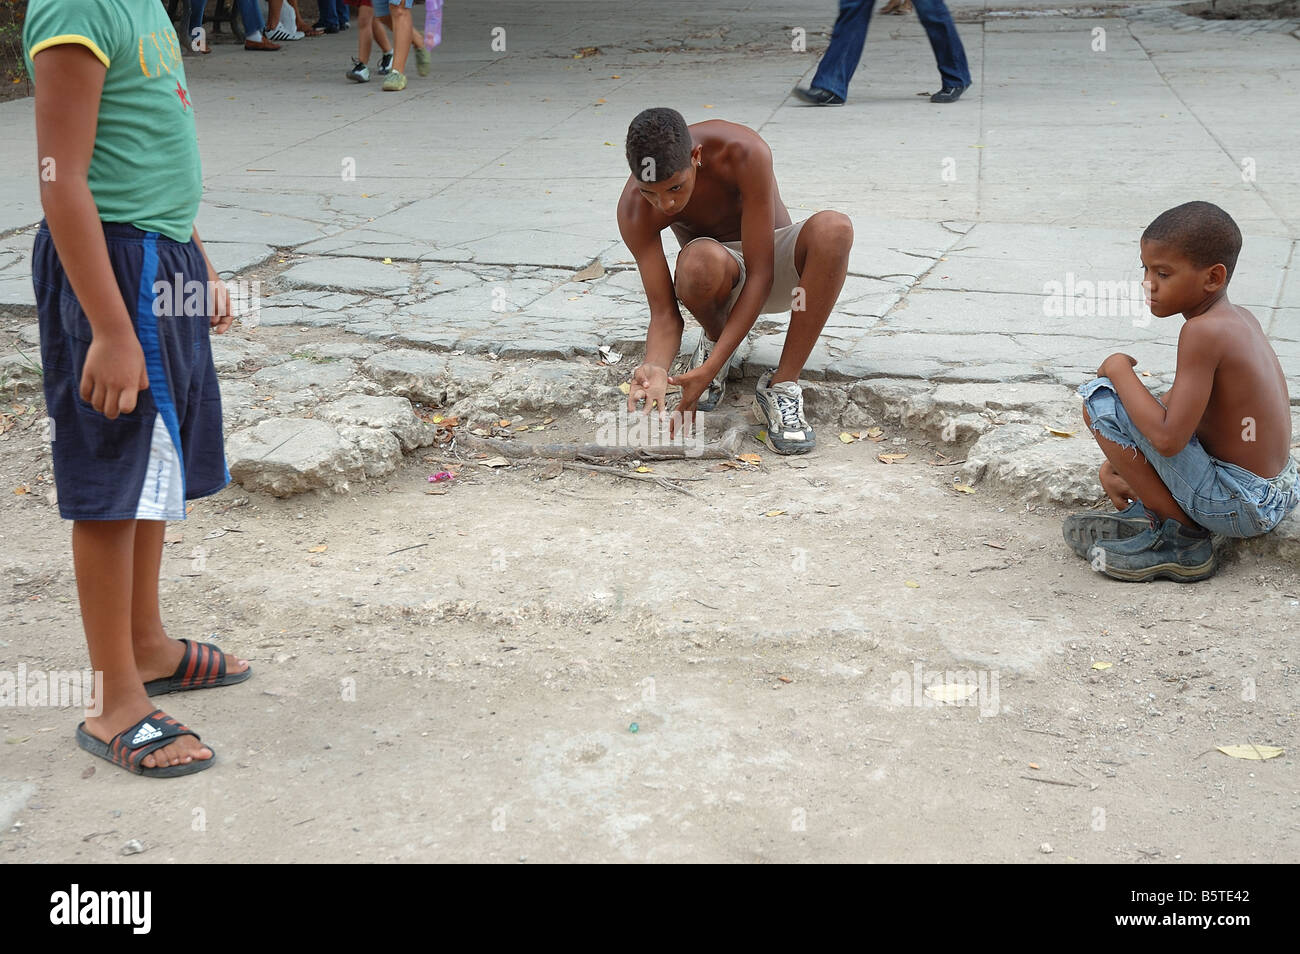 Kids playing marbles in Old Havana plaza, cuba Stock Photo